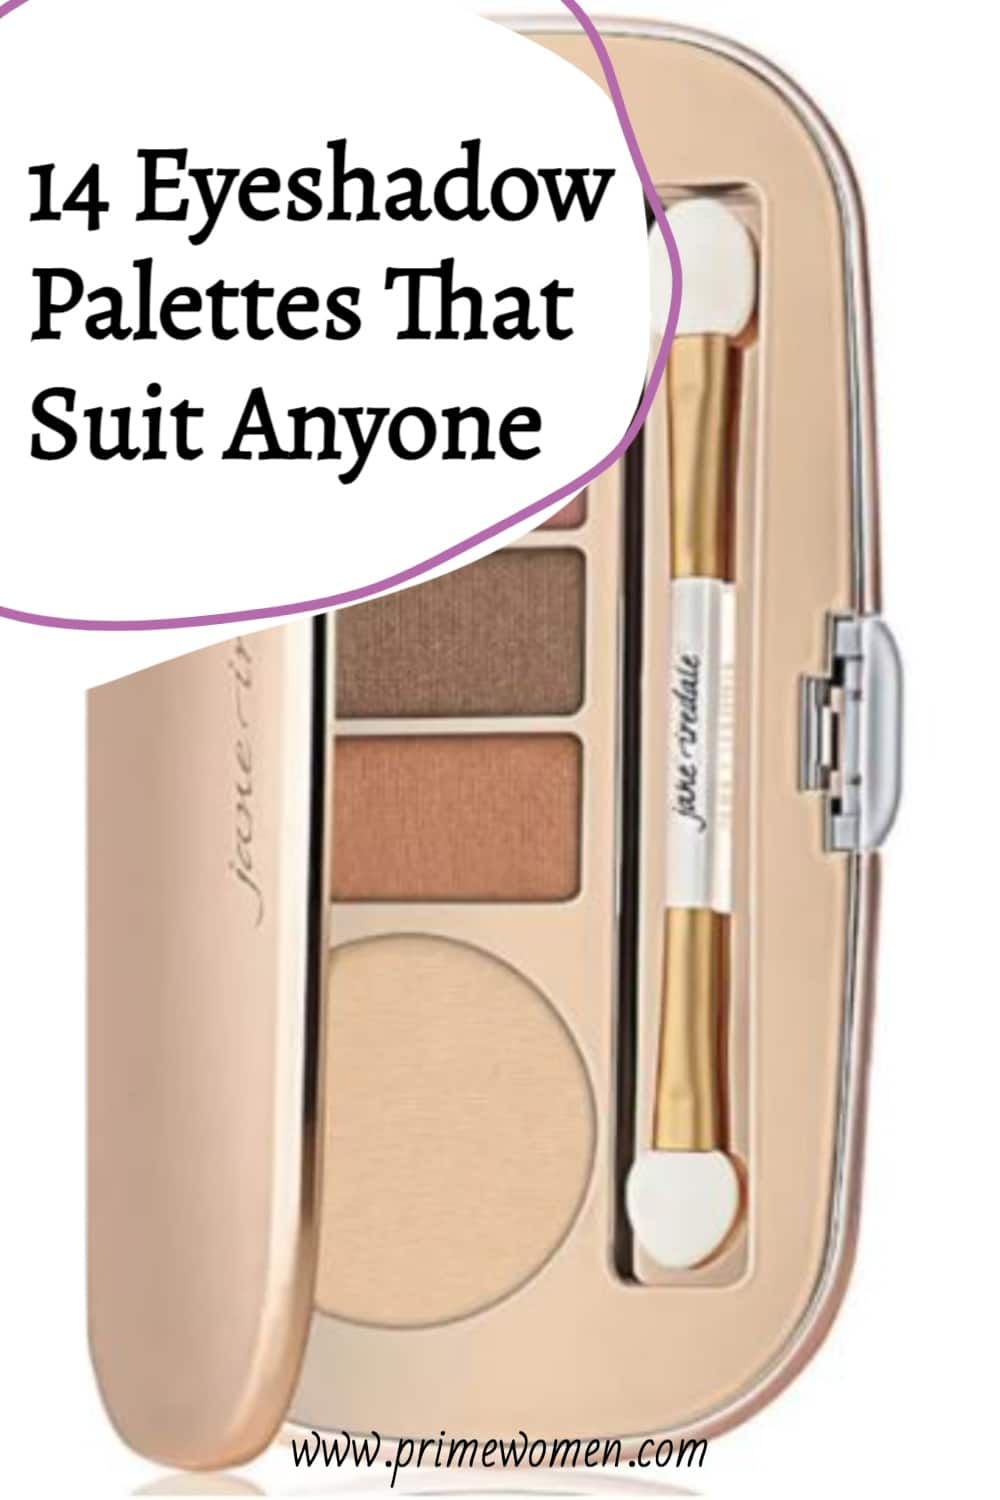 14 Eyeshadow Palettes That Suit Anyone